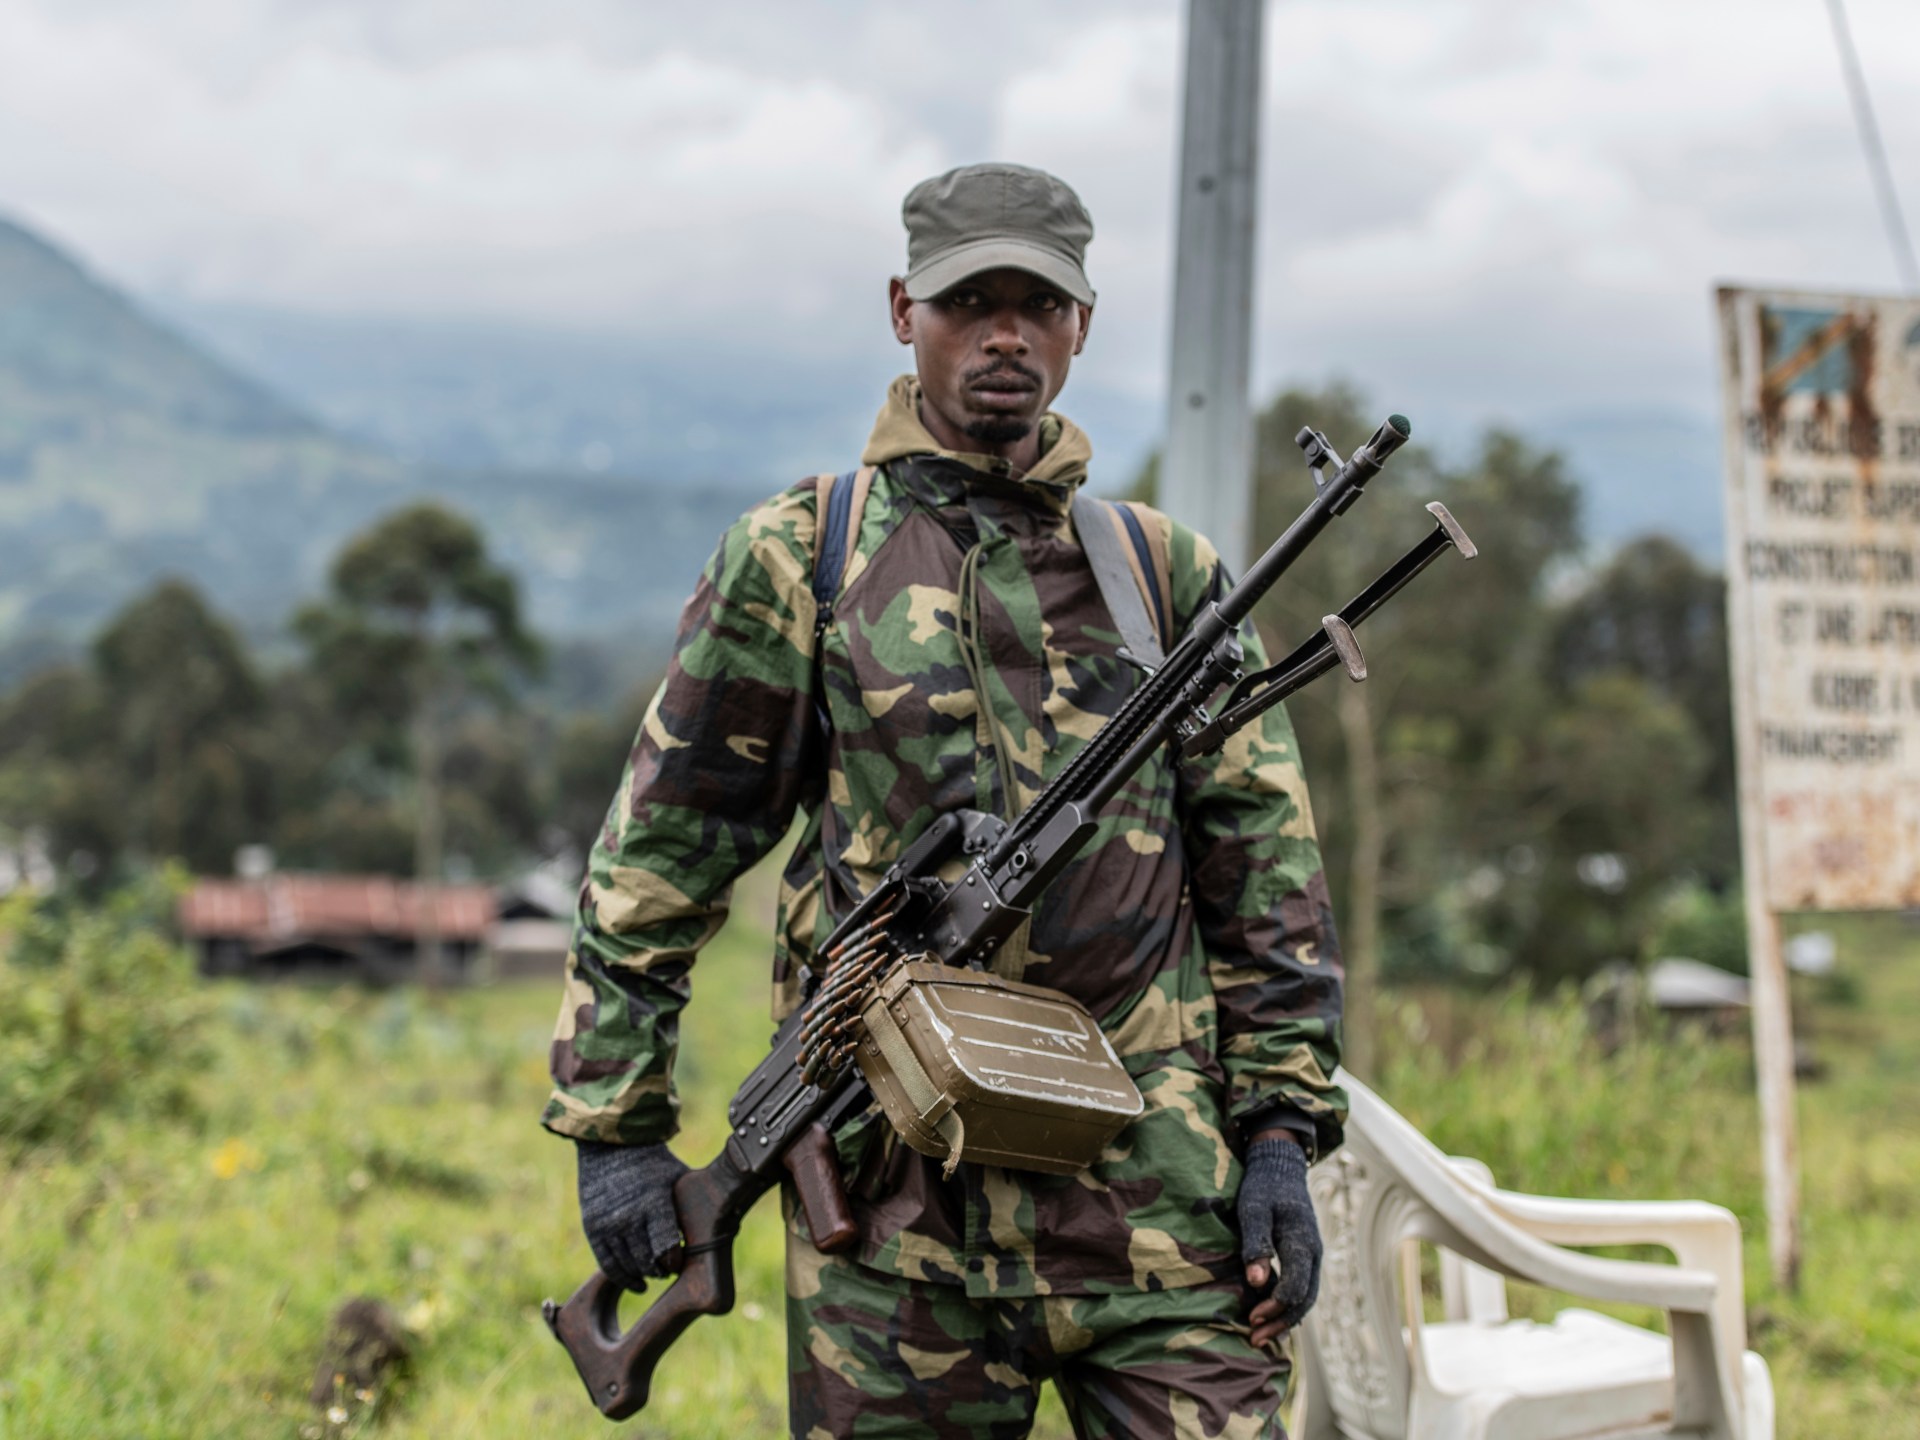 Two South African soldiers killed in DR Congo amid uptick in violence | Armed Groups News